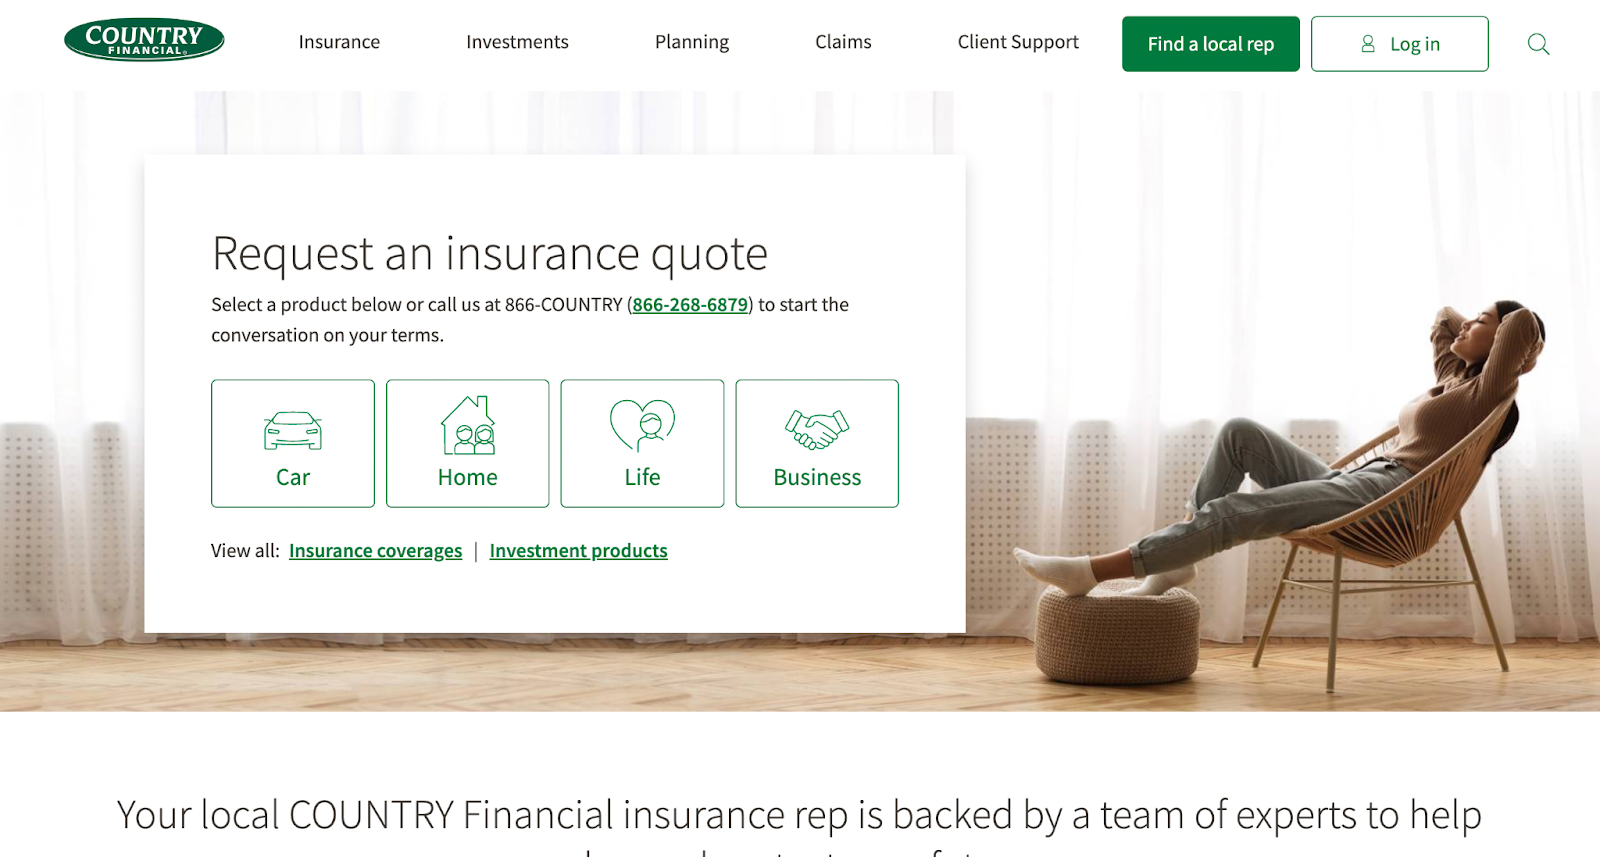 Insurance website design, example from Country Financial